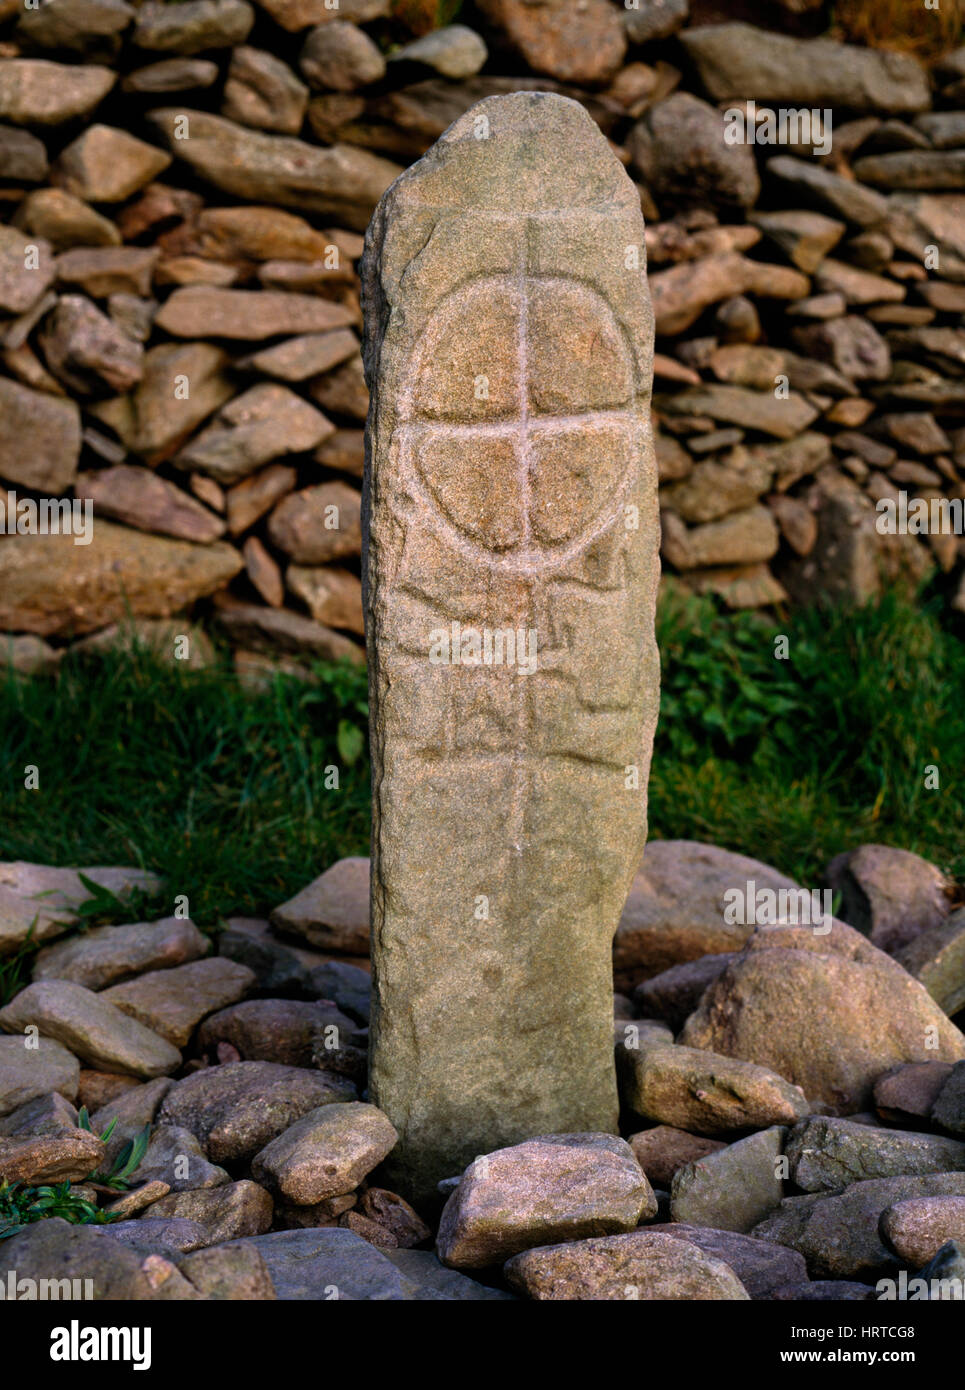 An Early Christian inscribed stone standing in a rectangular bed of stones (leacht) beside Gallarus boat-shaped oratory, Dingle, Co. Kerry, Ireland. Stock Photo